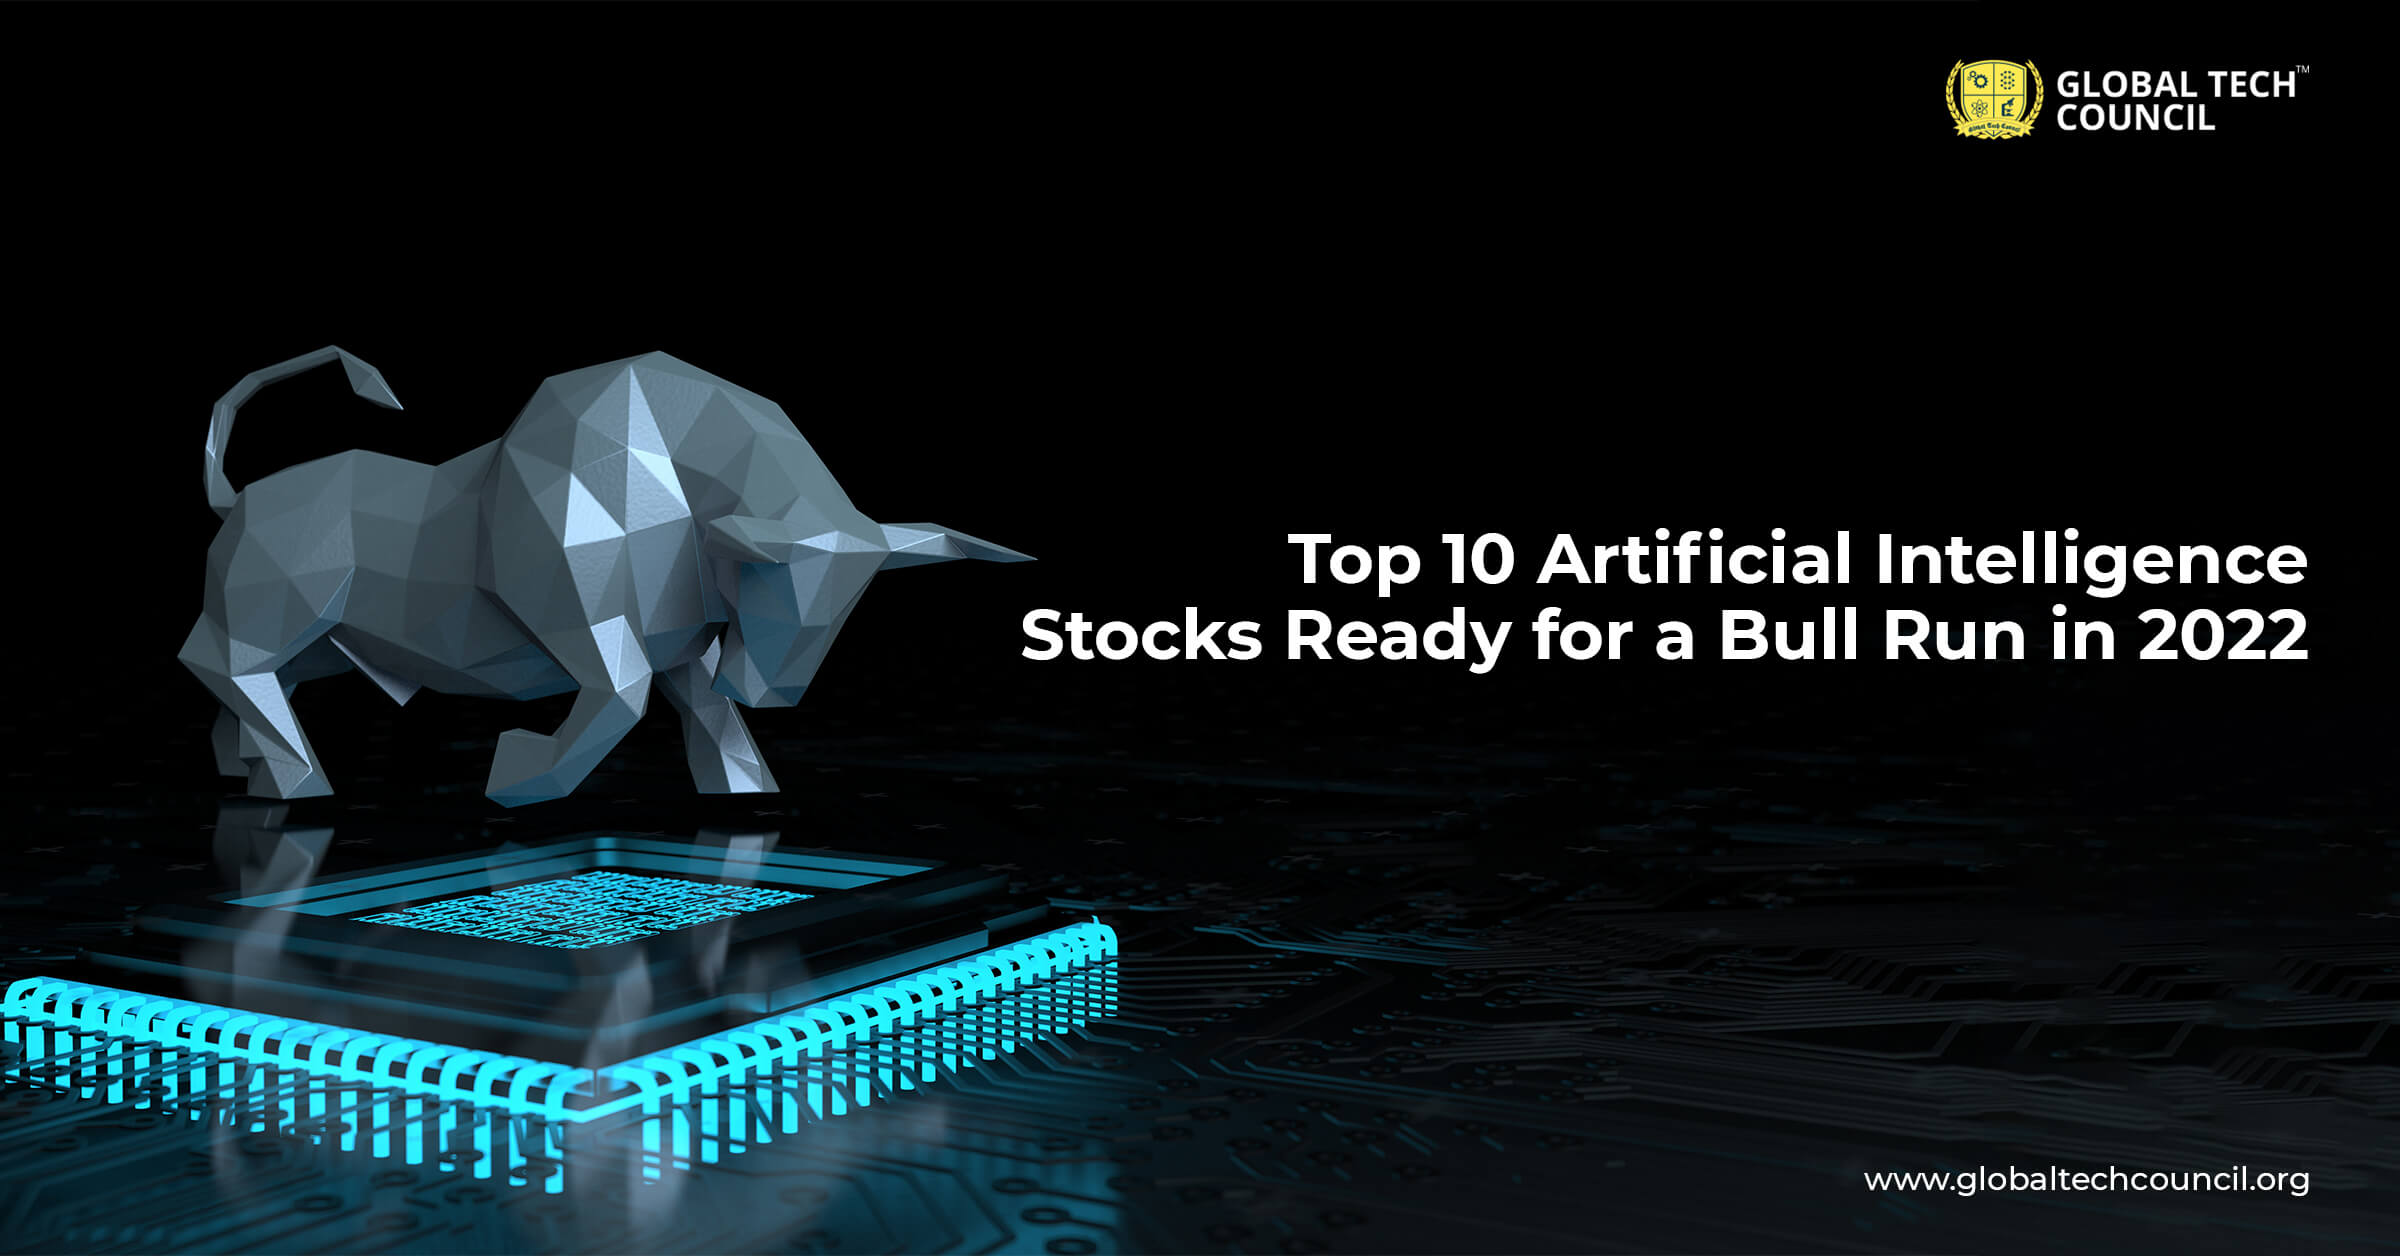 Top 10 Artificial Intelligence Stocks Ready for a Bull Run in 2022